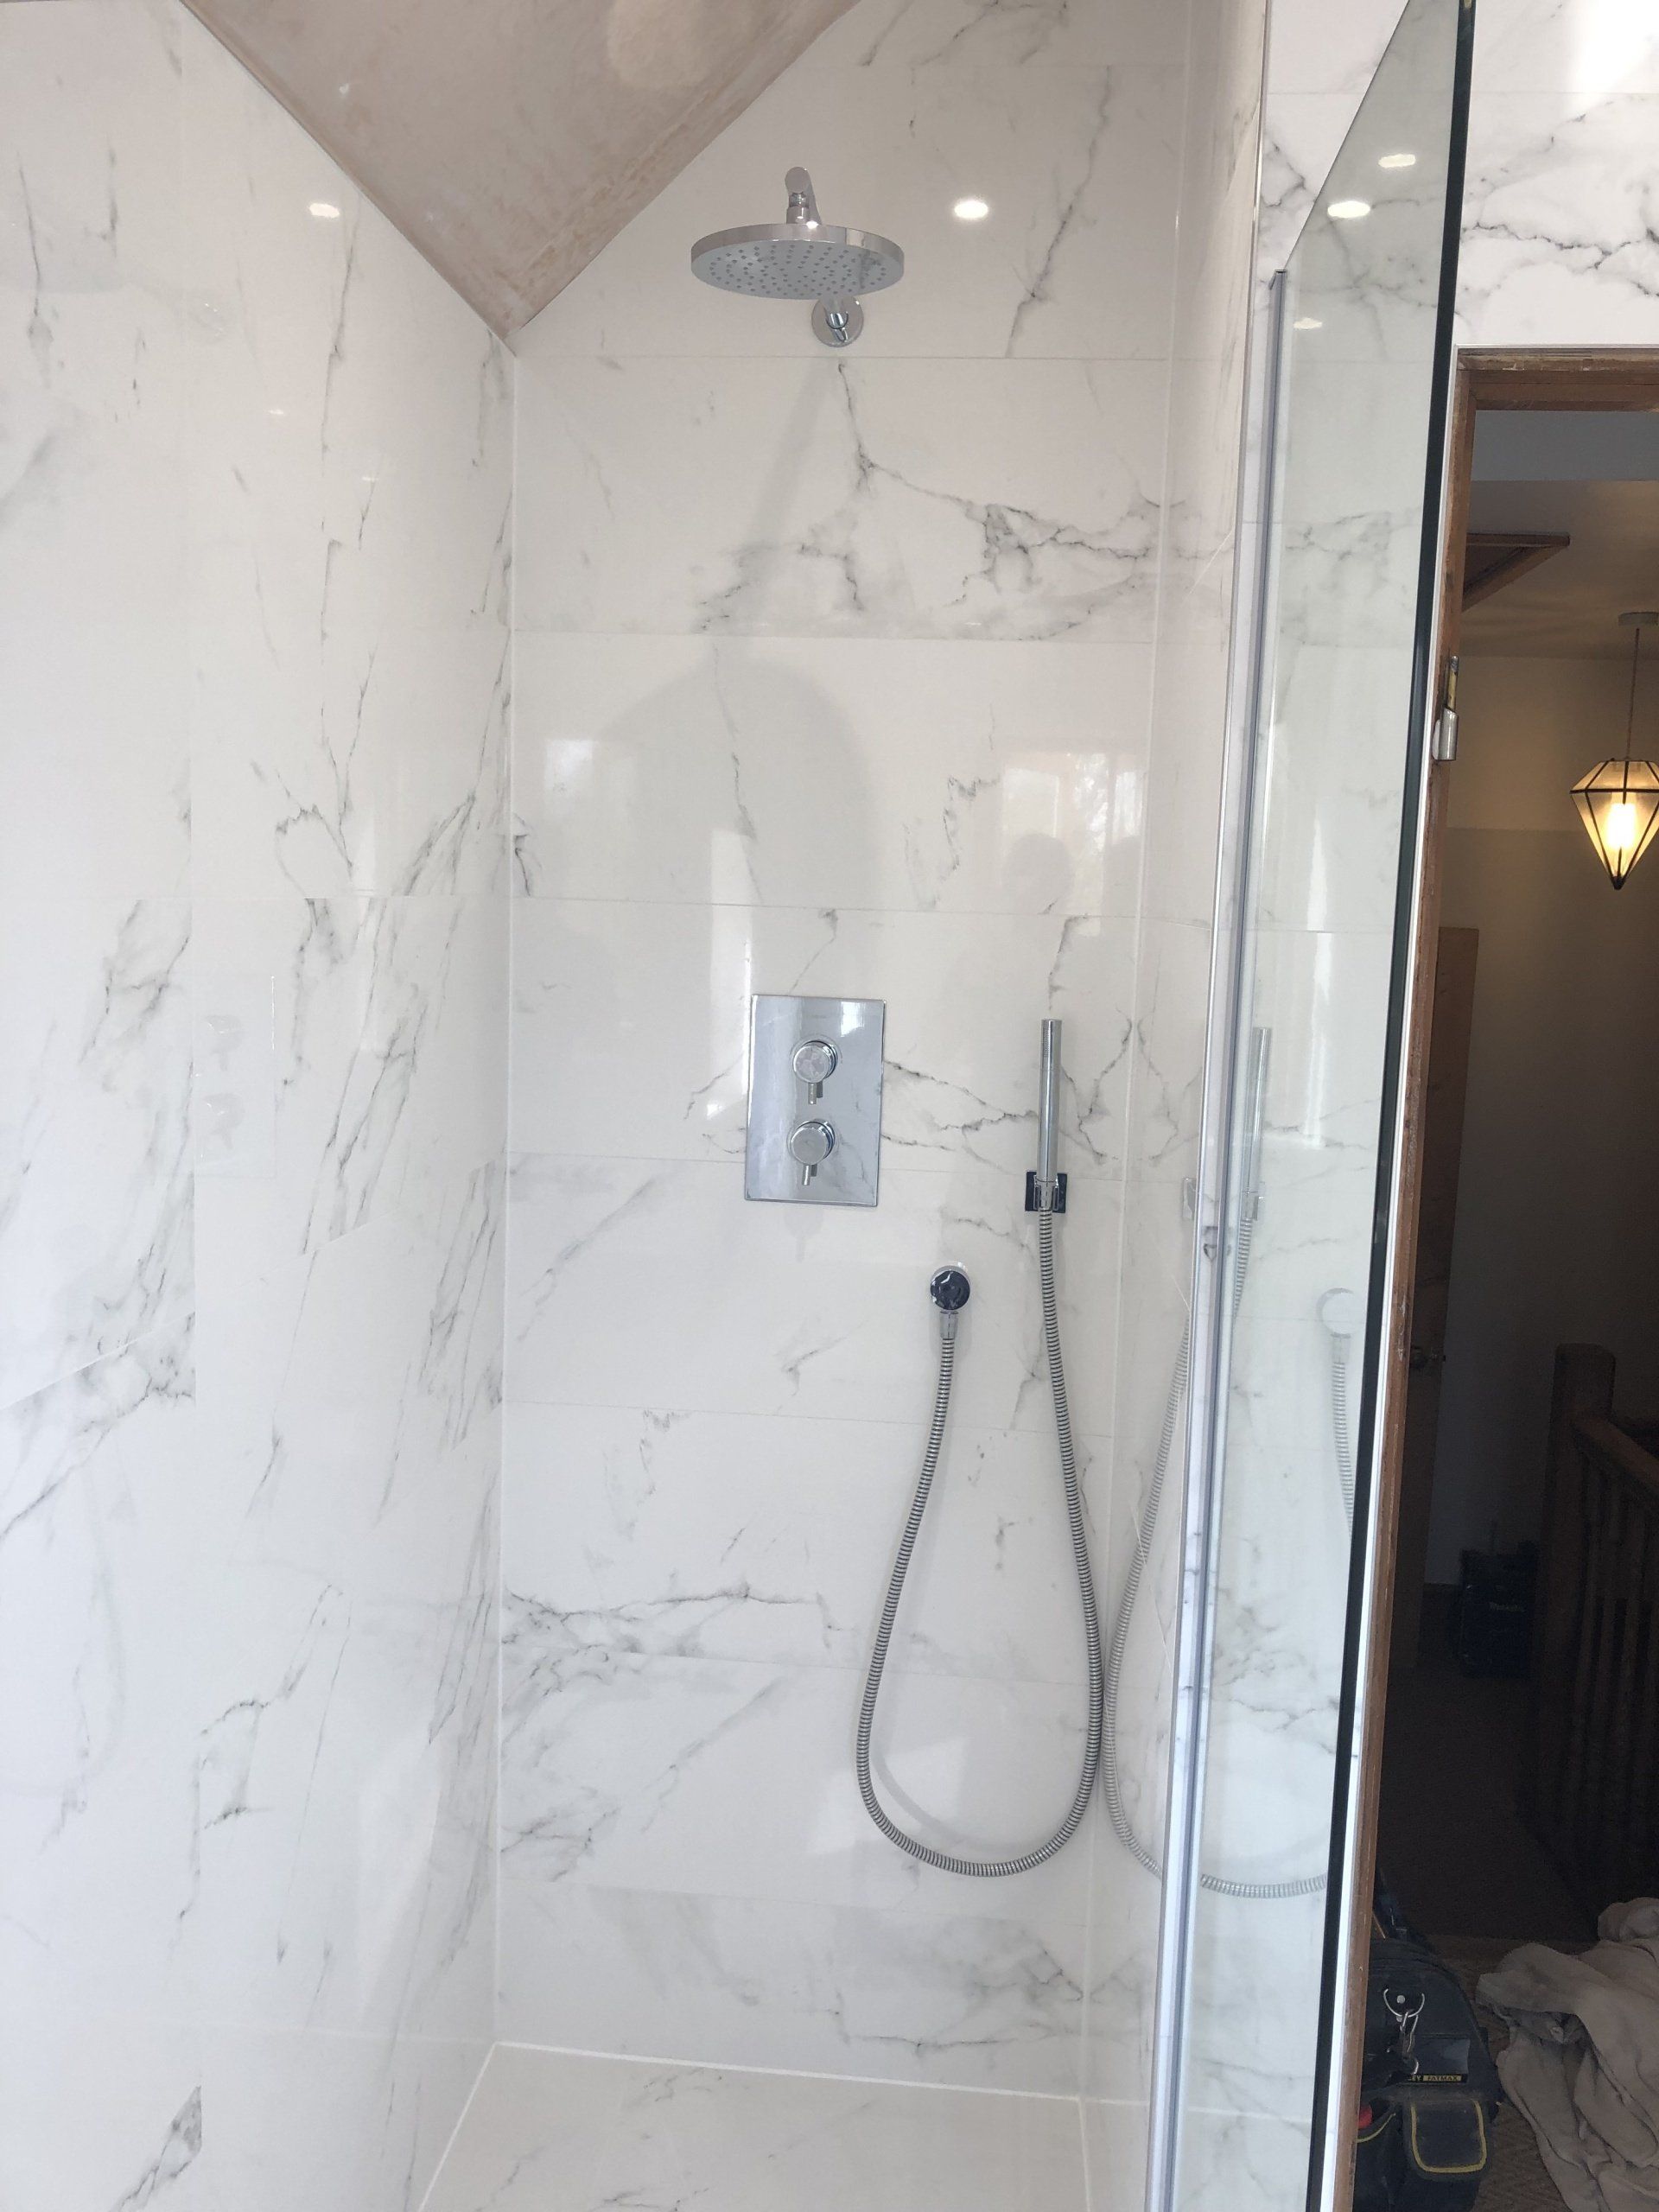 Please look below to find a complete transformation- we created a walk in shower room with beautiful white marble tiles with gloss white furniture.